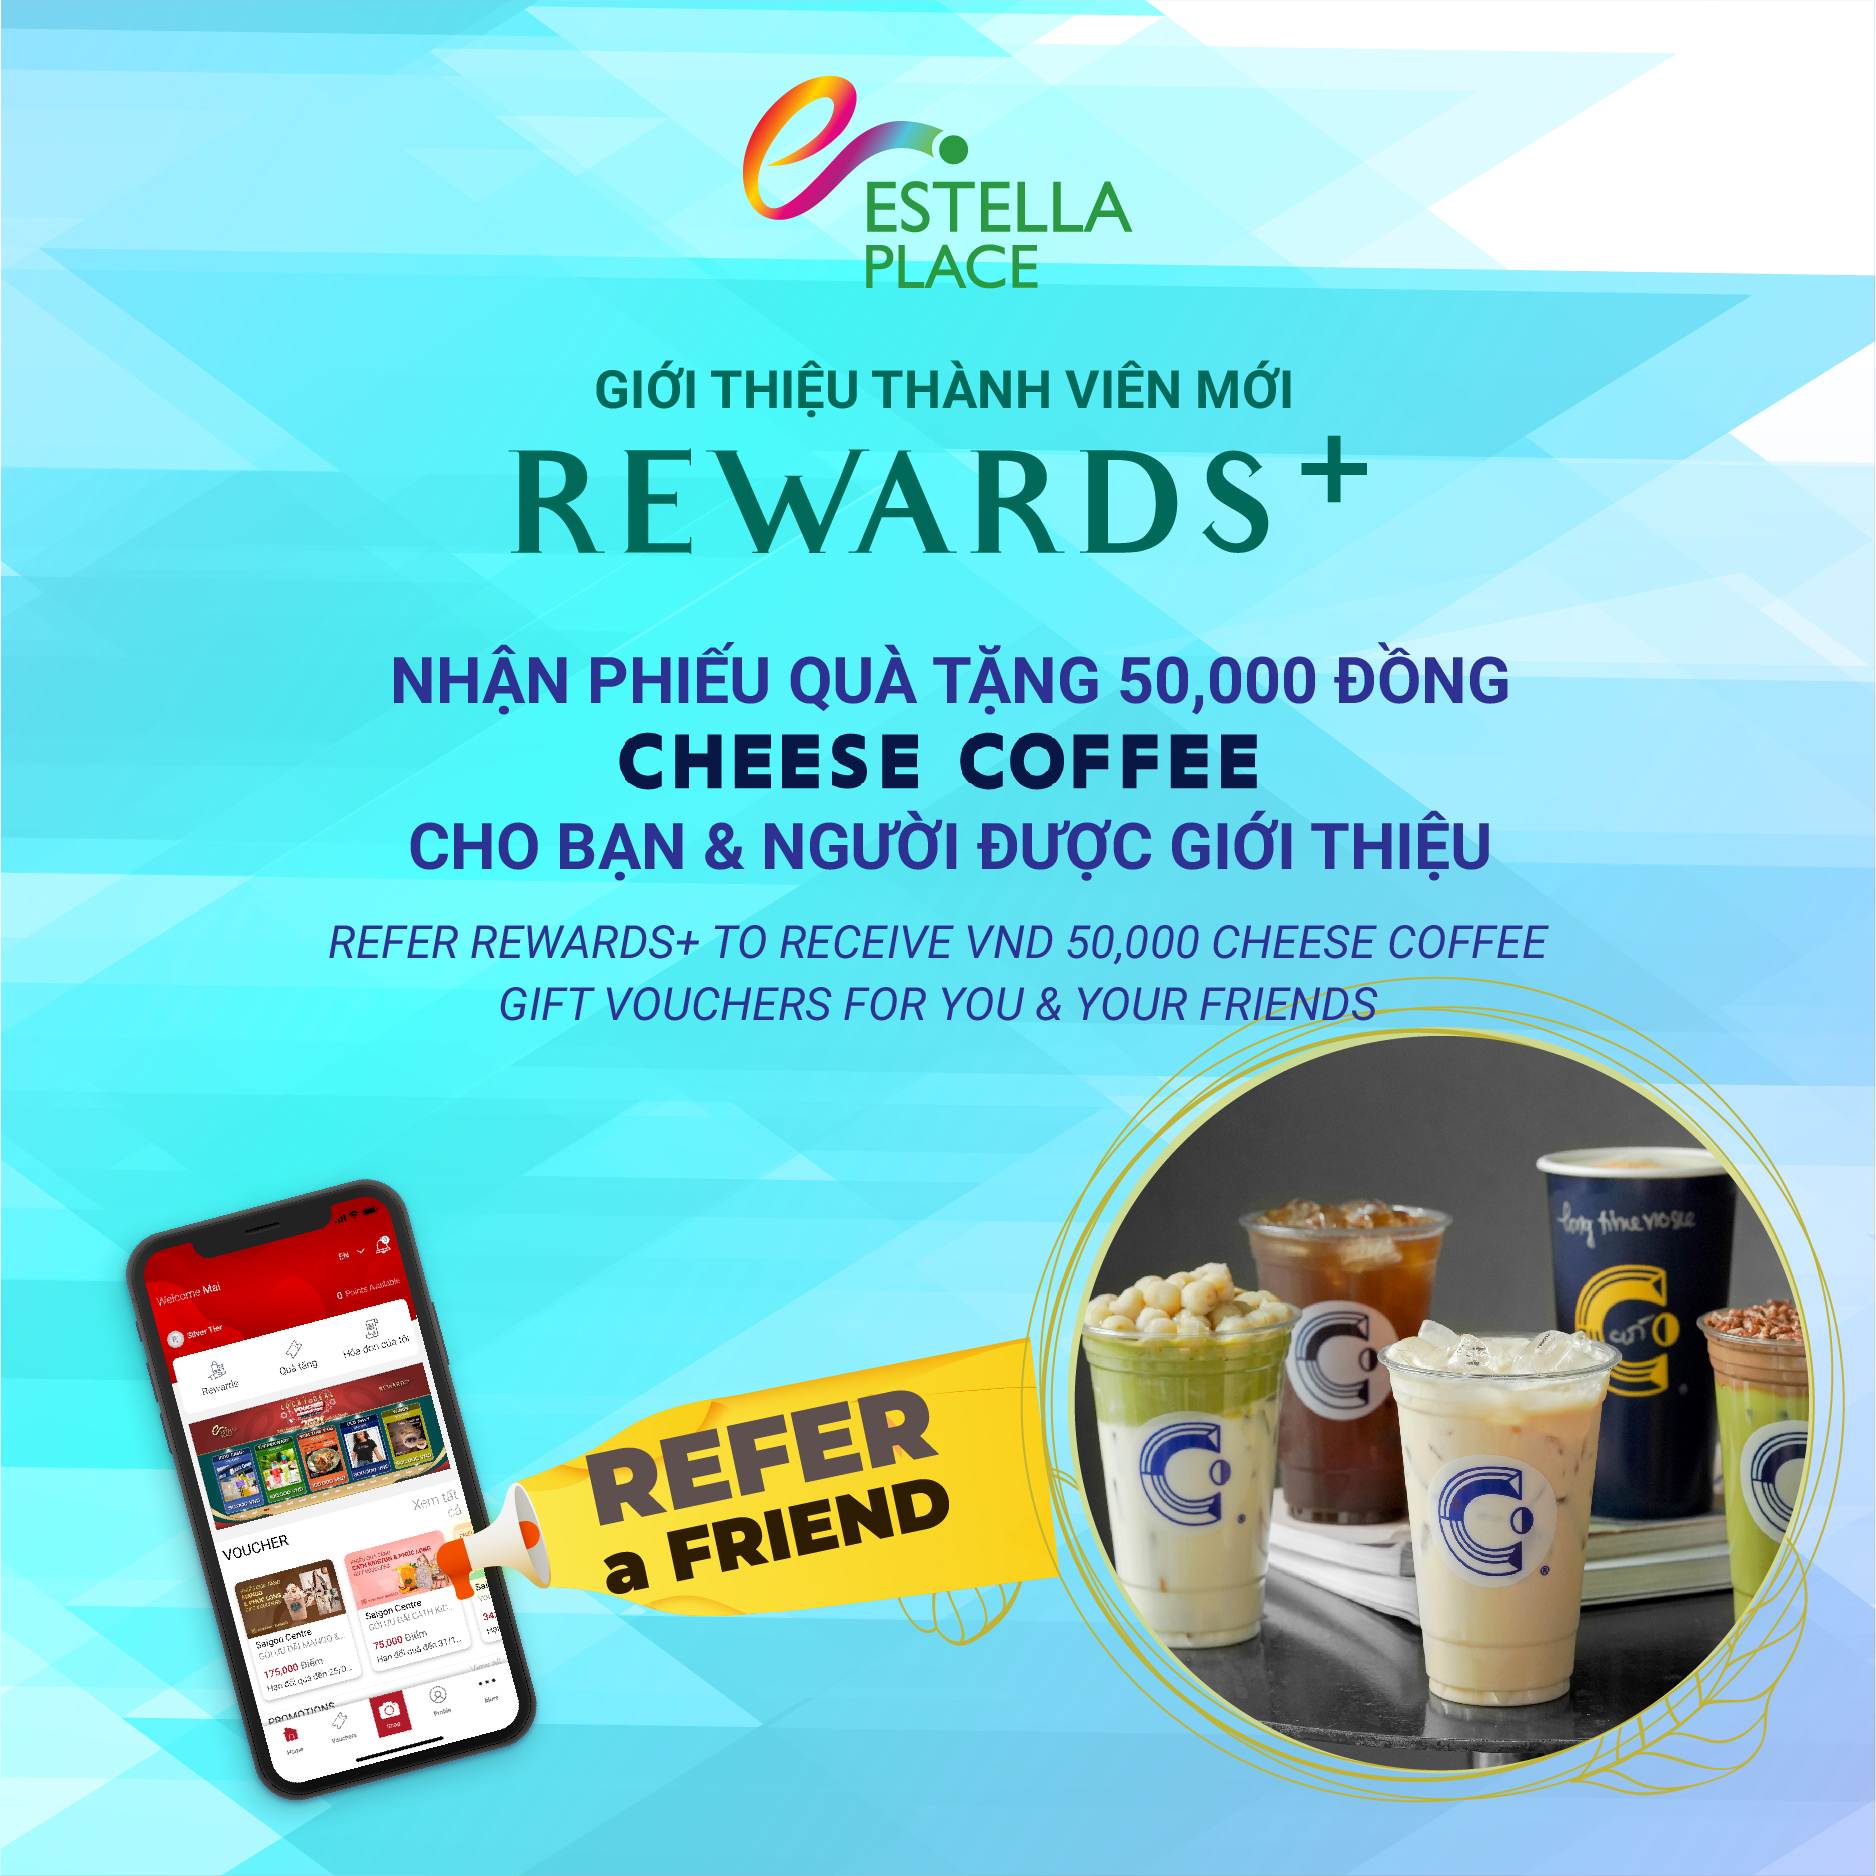 REFER NEW REWARDS+ MEMBERS AND RECEIVE GIFT VOUCHER